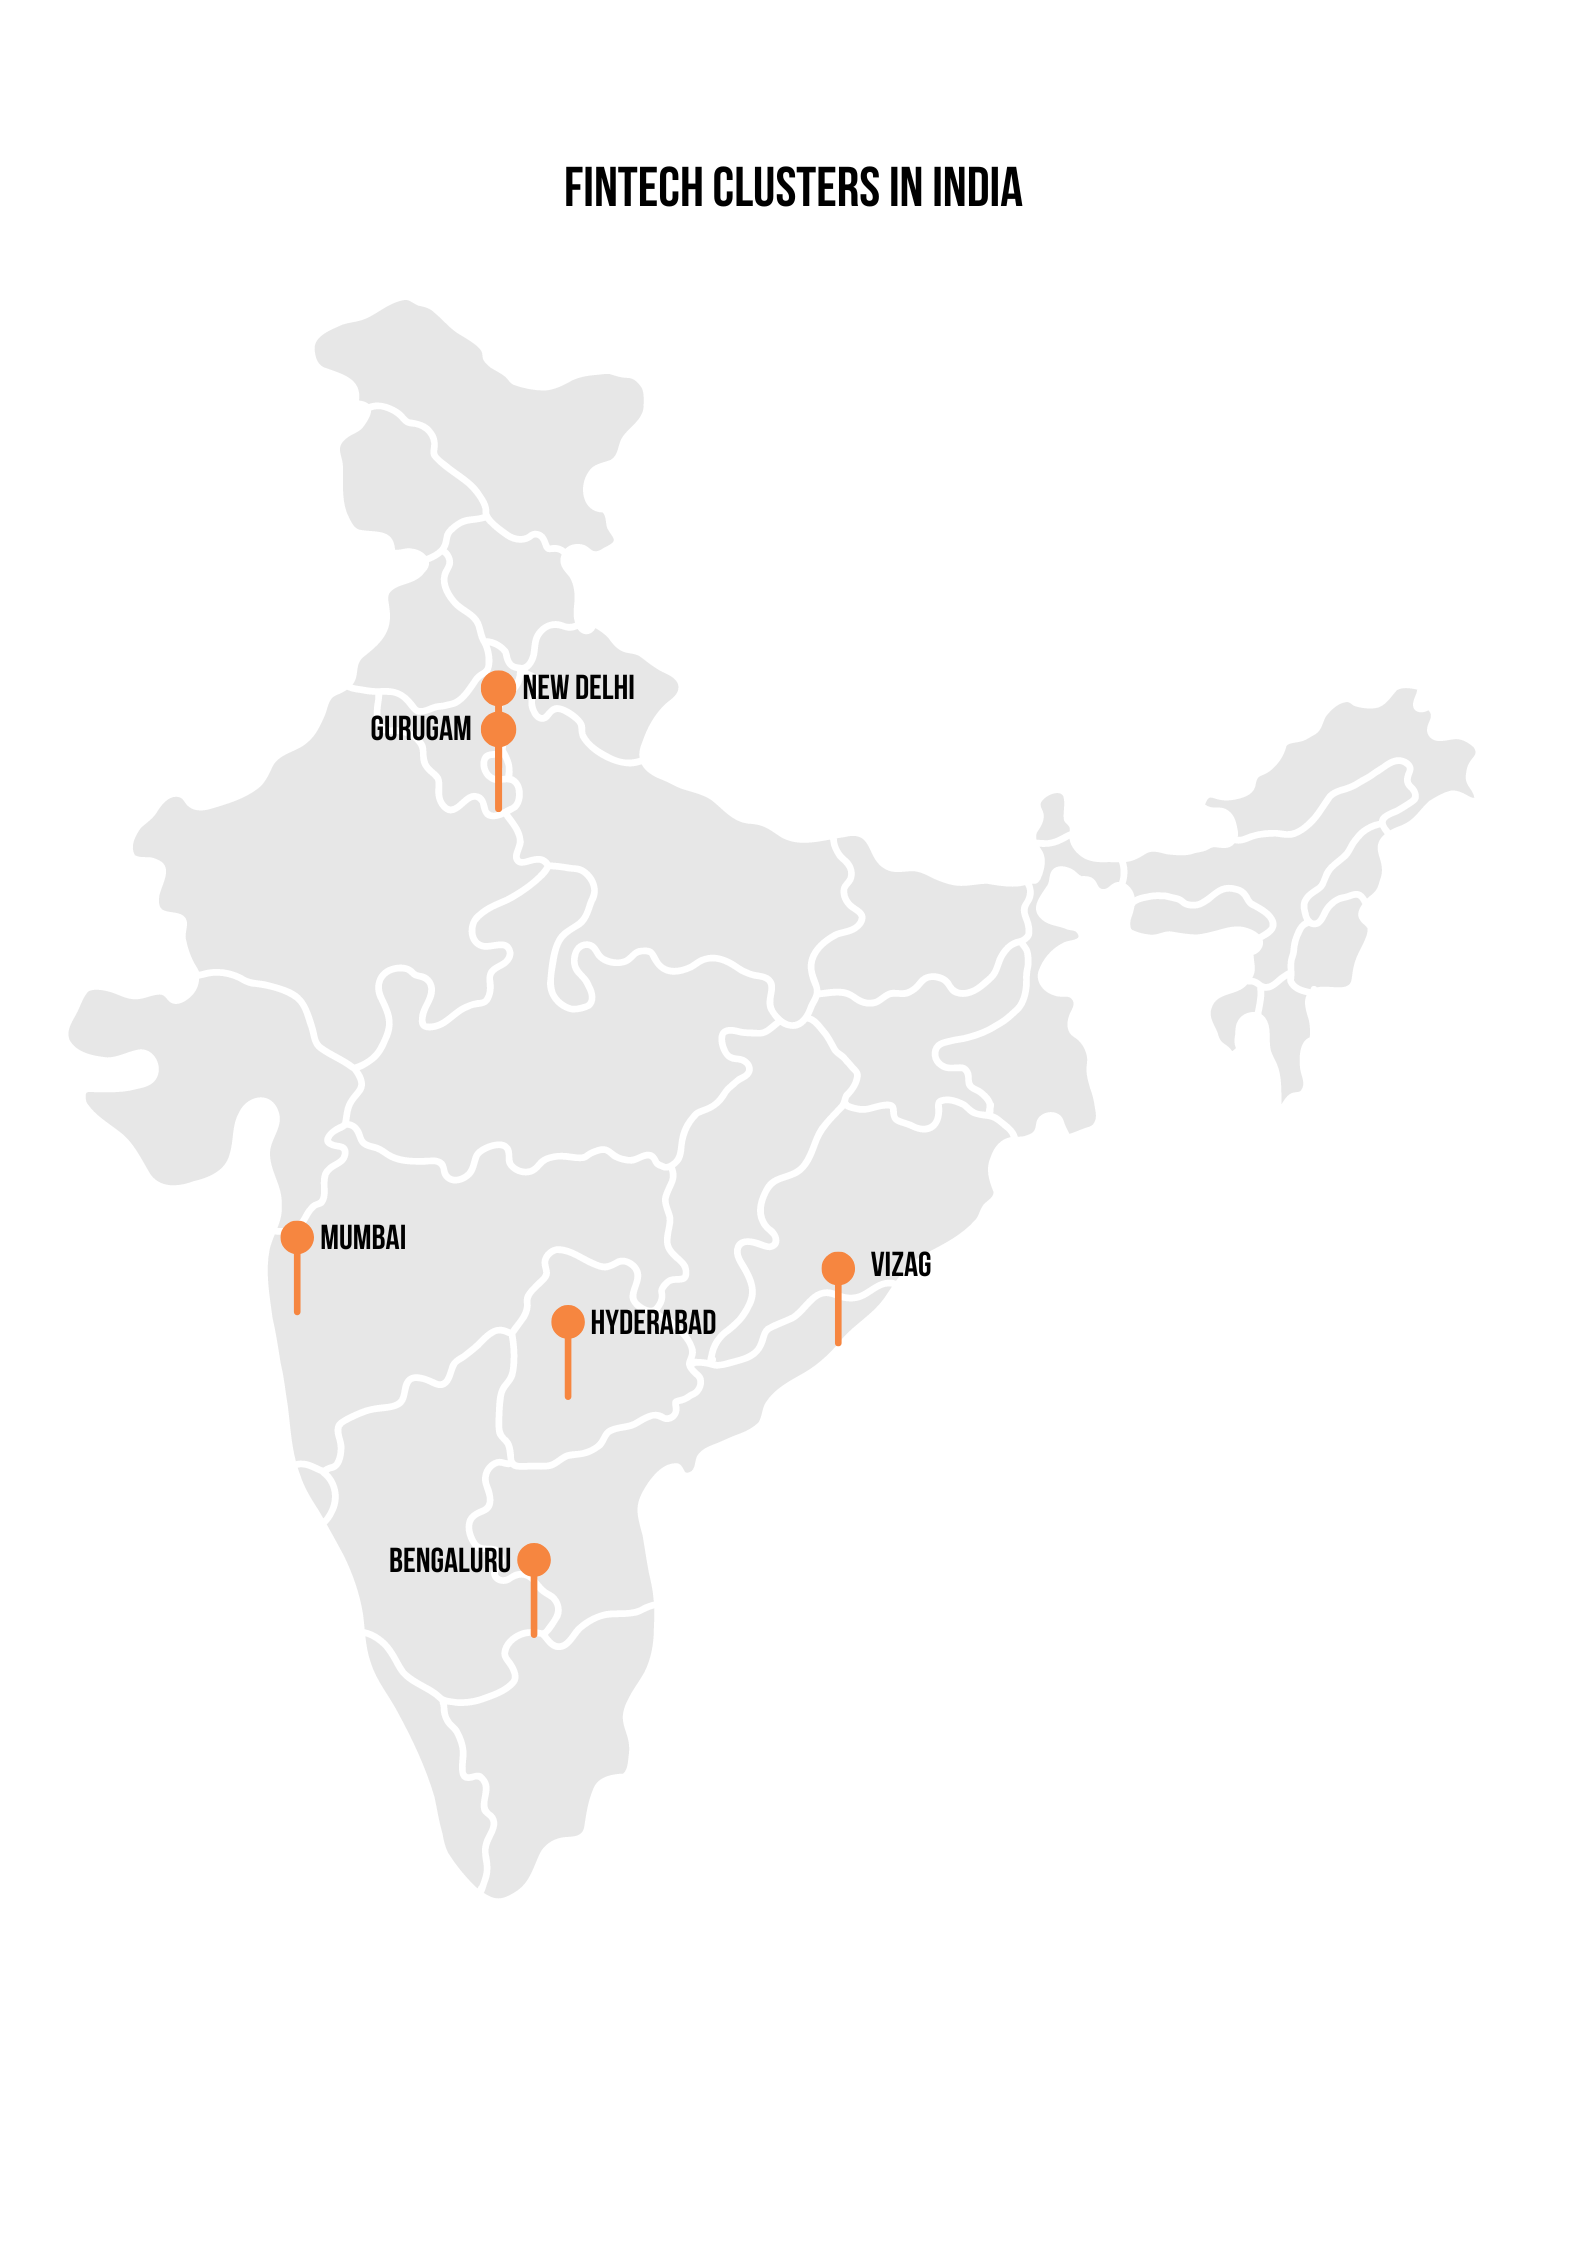 FinTech sector clusters India